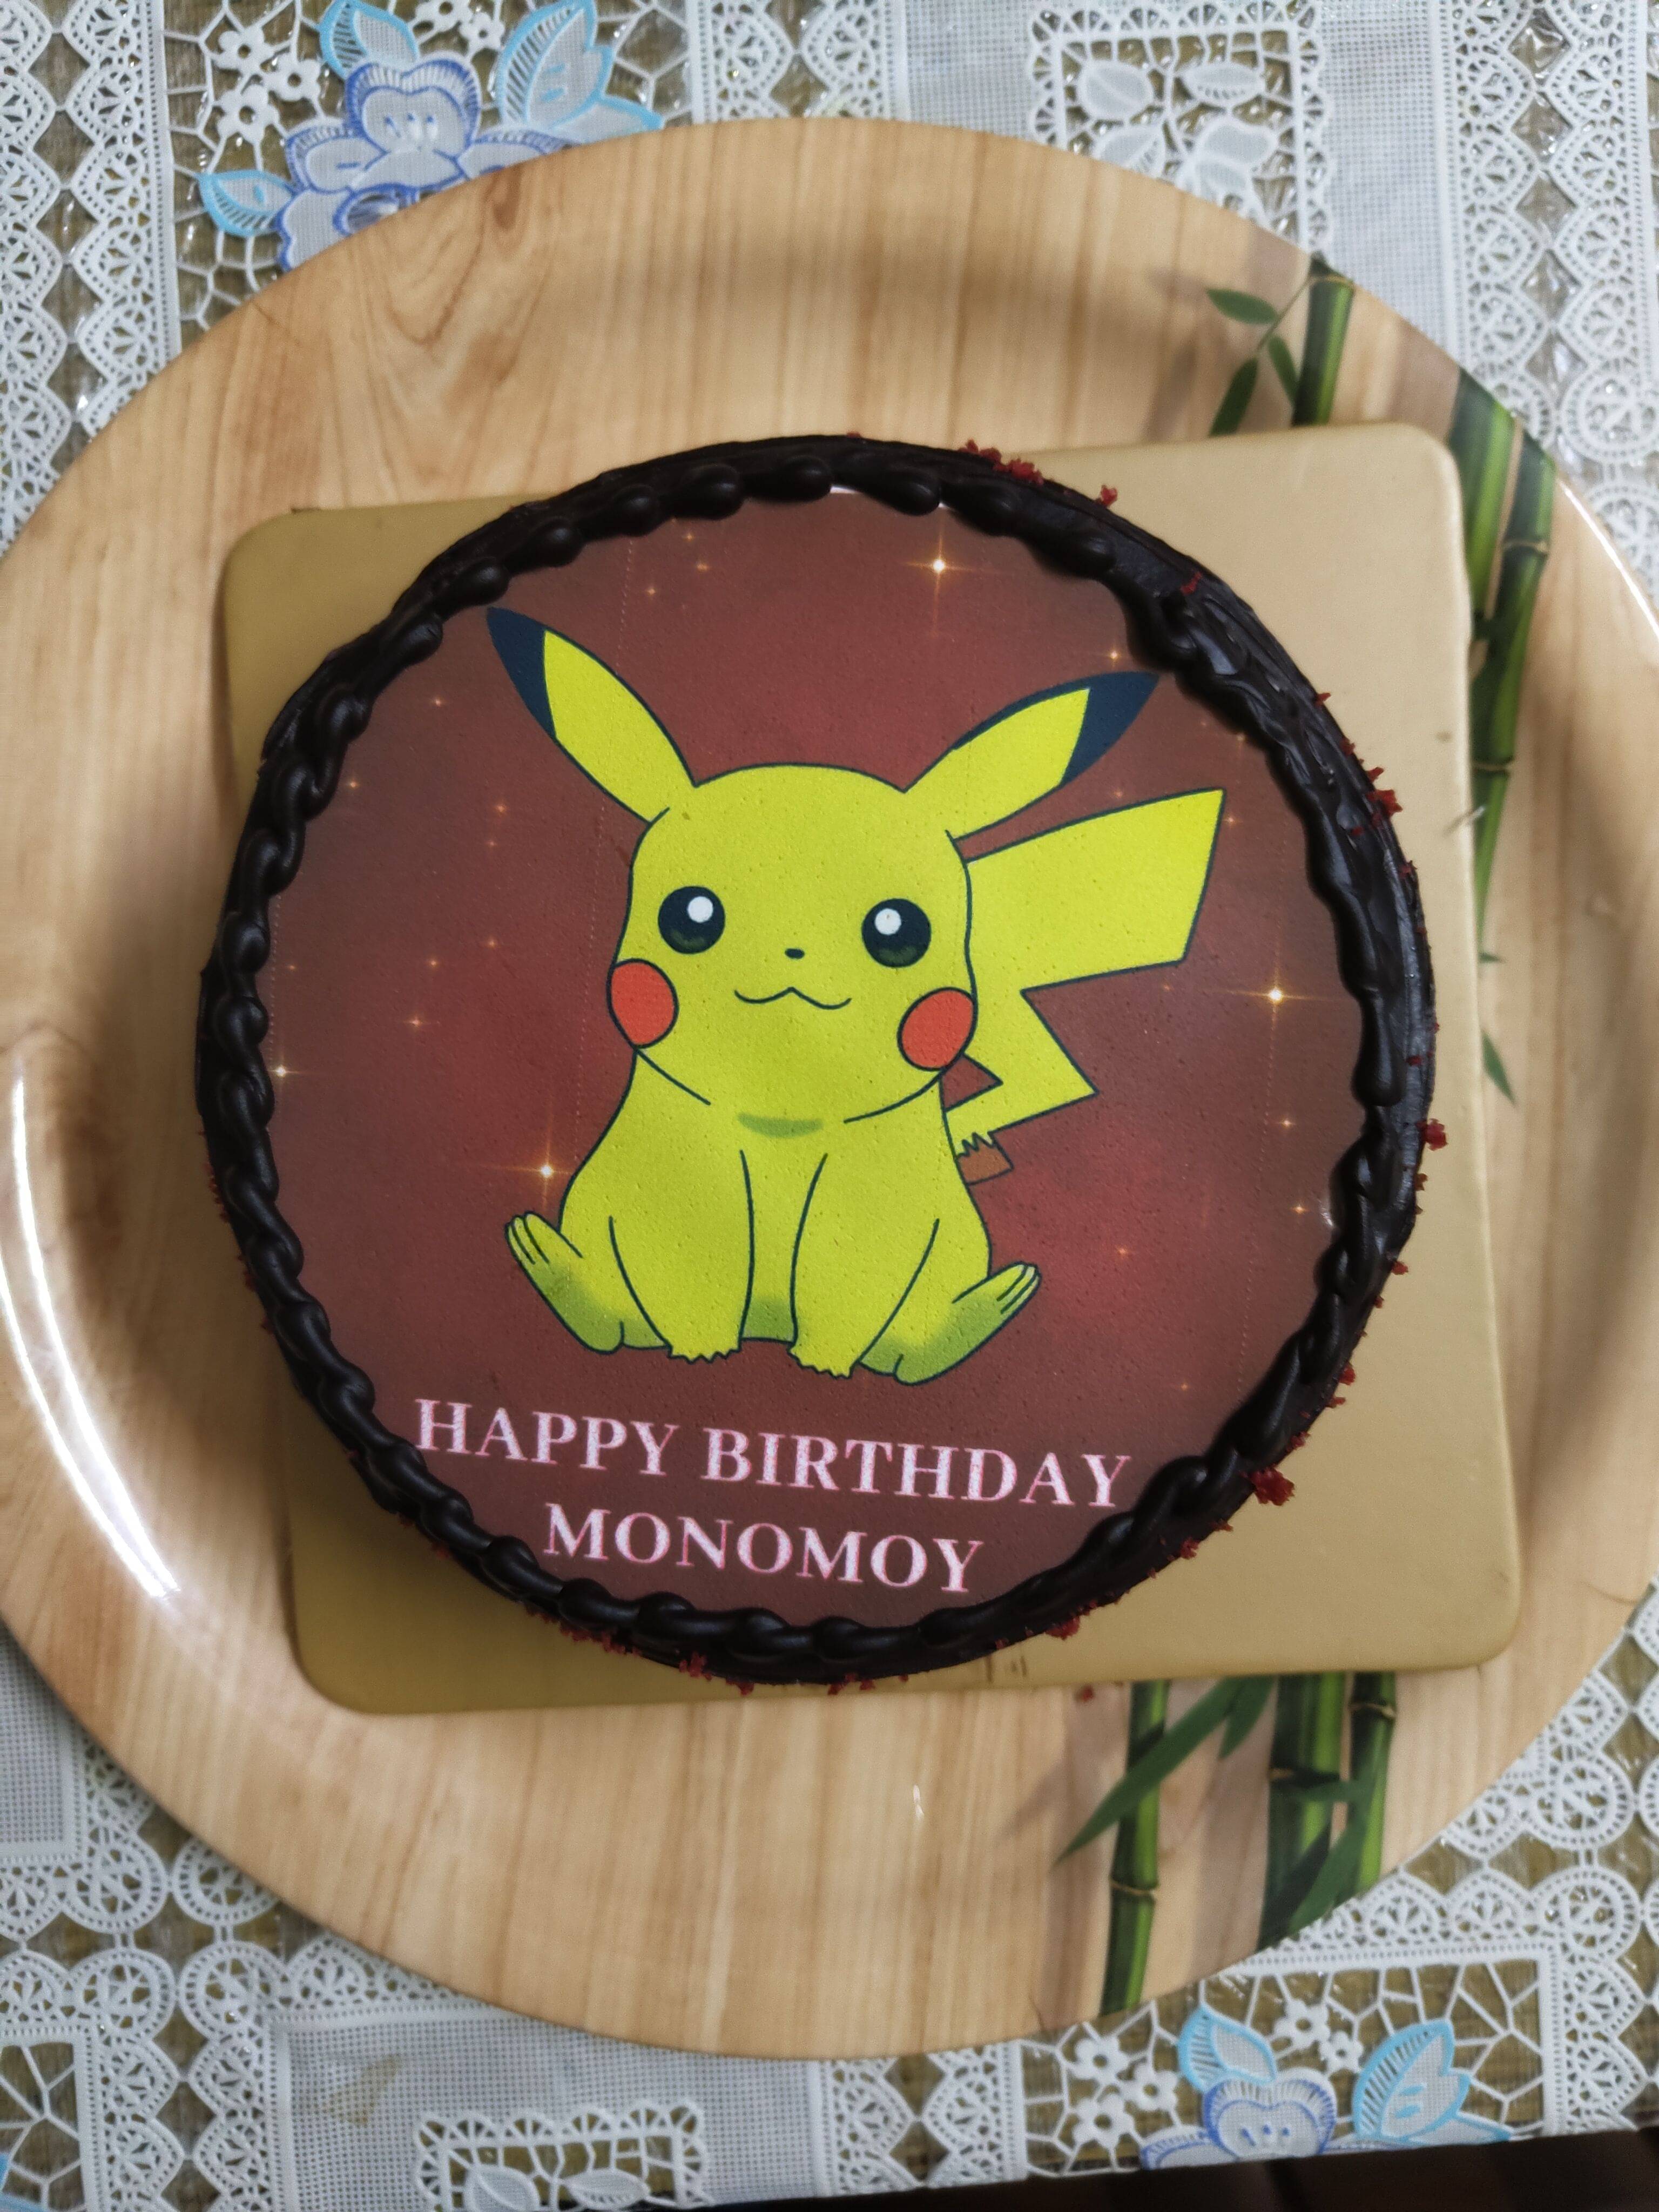 27+ Best Image of Pikachu Birthday Cake - davemelillo.com | Pokemon  birthday cake, Pikachu cake, Pokemon birthday party